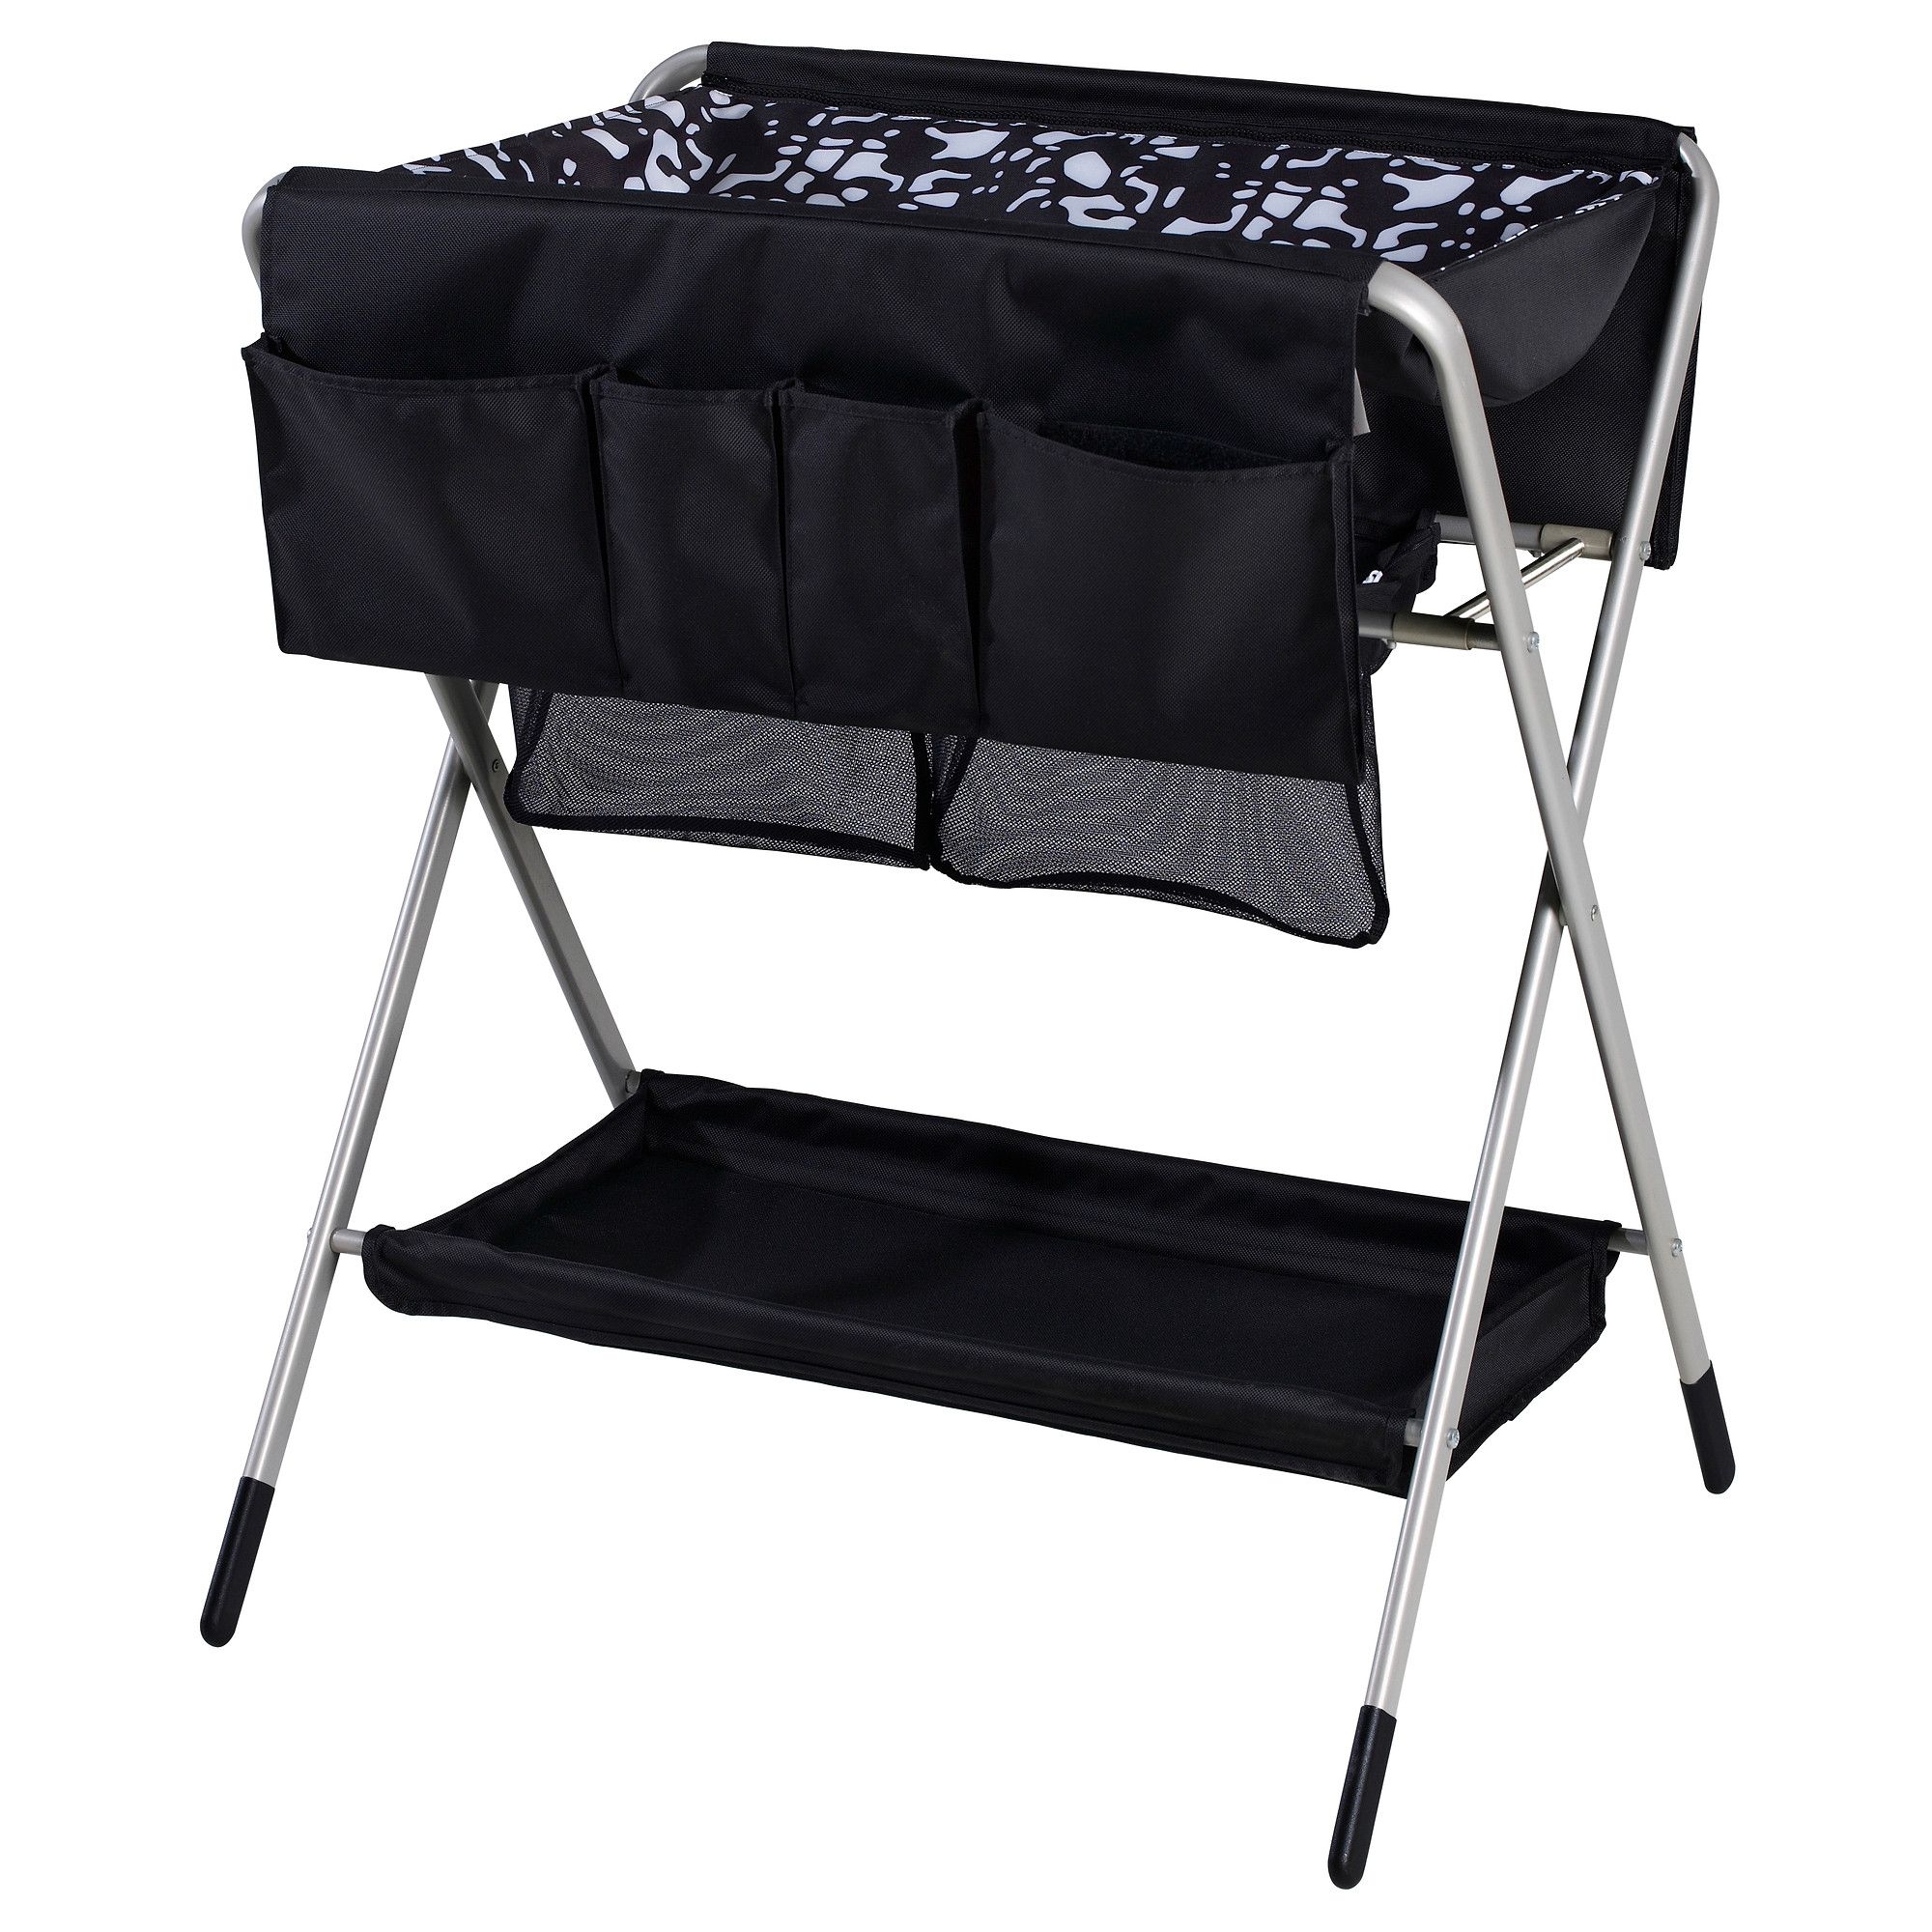 Collapsible changing table 6